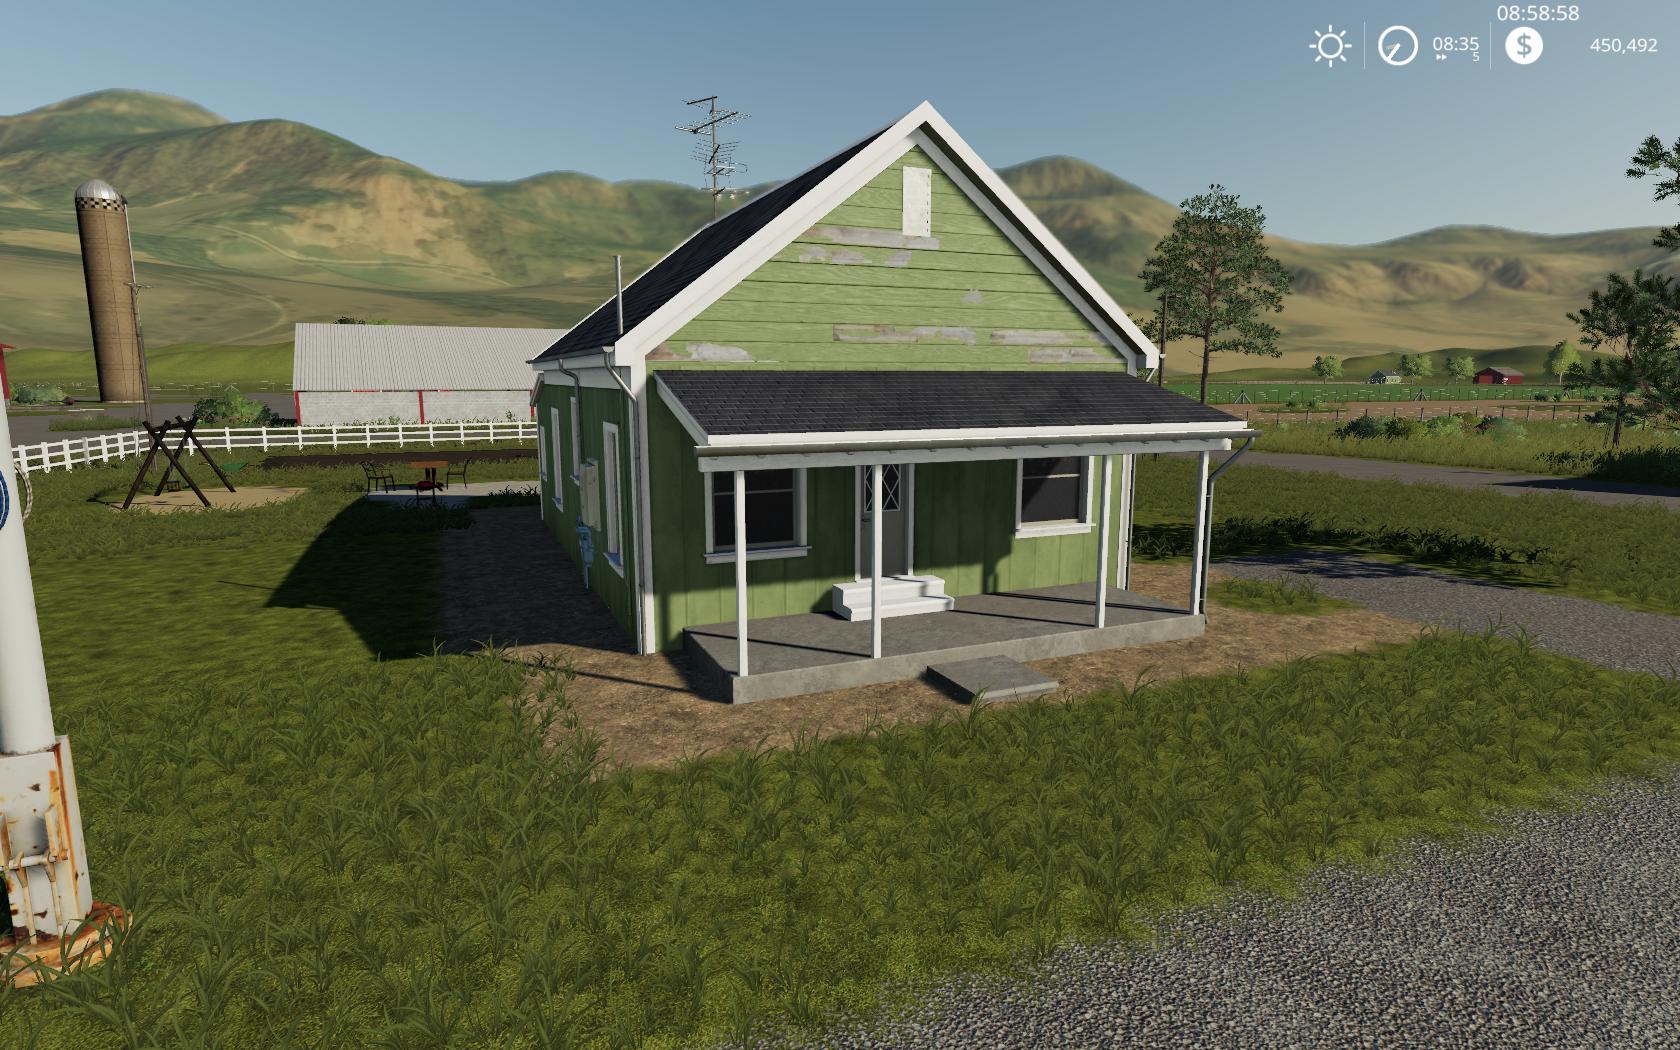 Placeable 2 bedroom house with sleep trigger v 1.0